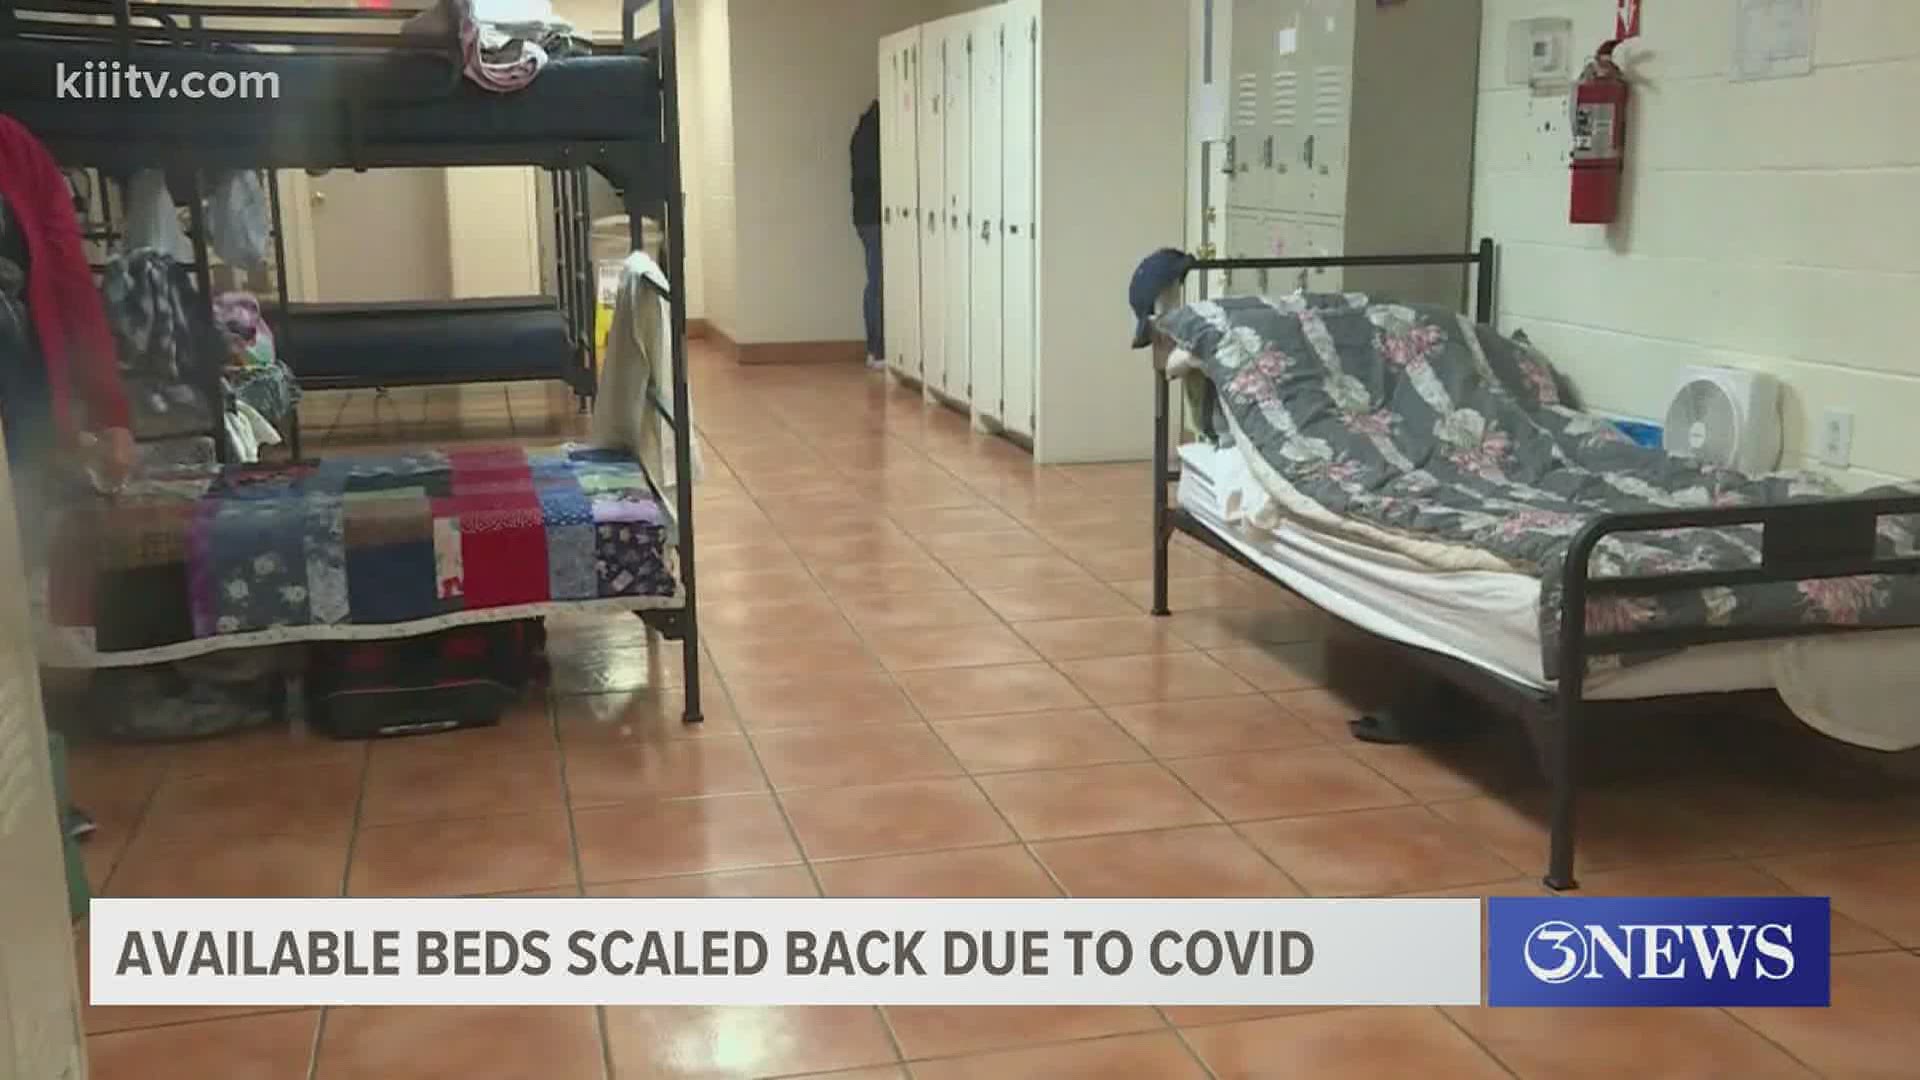 Throughout the COVID-19 pandemic, it has been difficult for shelters to provide their normal resources for the homeless due to restrictions in place.